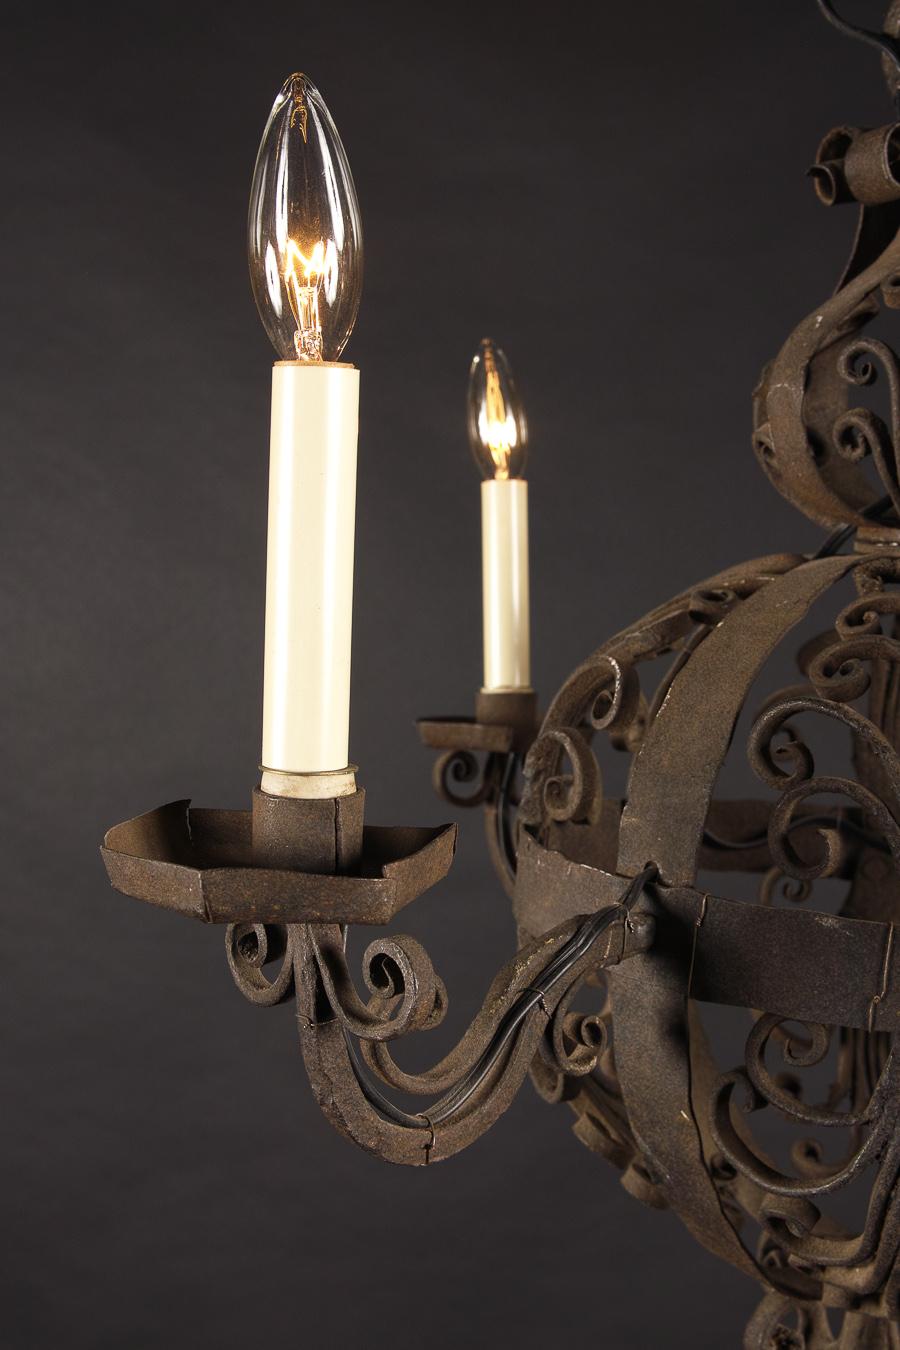 This 18th century spherical chandelier is made from hand wrought iron circa 1780. The French antique piece features iron bobeches and floriate scroll decorations at top, with a floriate finial. It’s classically medieval in design and draped in